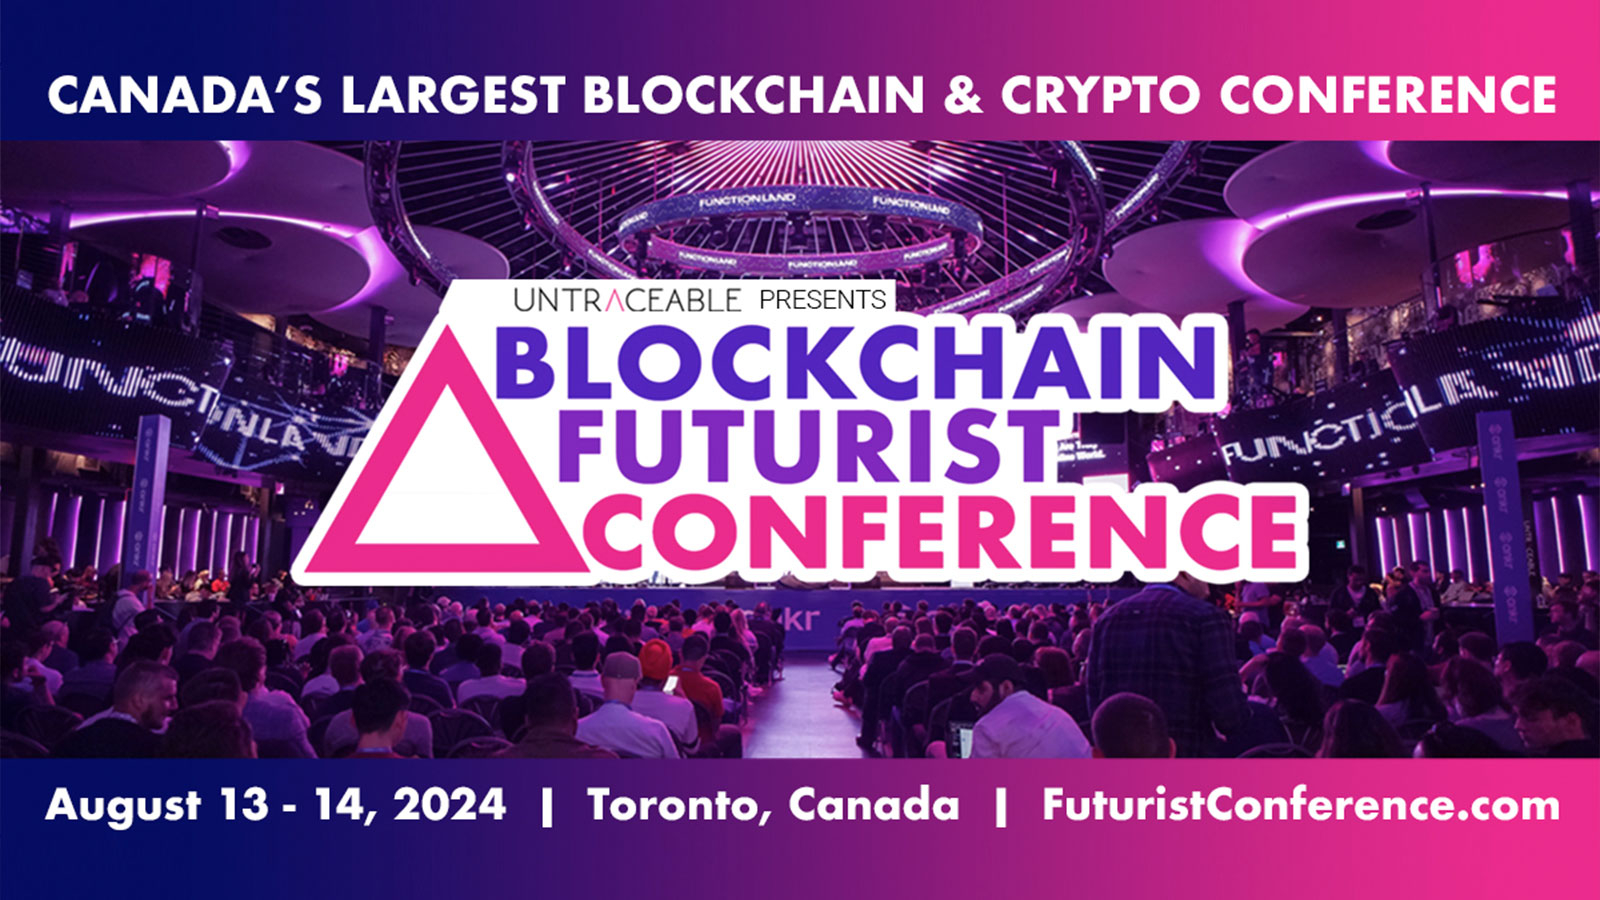 Blockchain Futurist Conference this August 13-14, 2024 to Showcase the Future of Bitcoin, Web3, and Cryptocurrency in Toronto, Canada